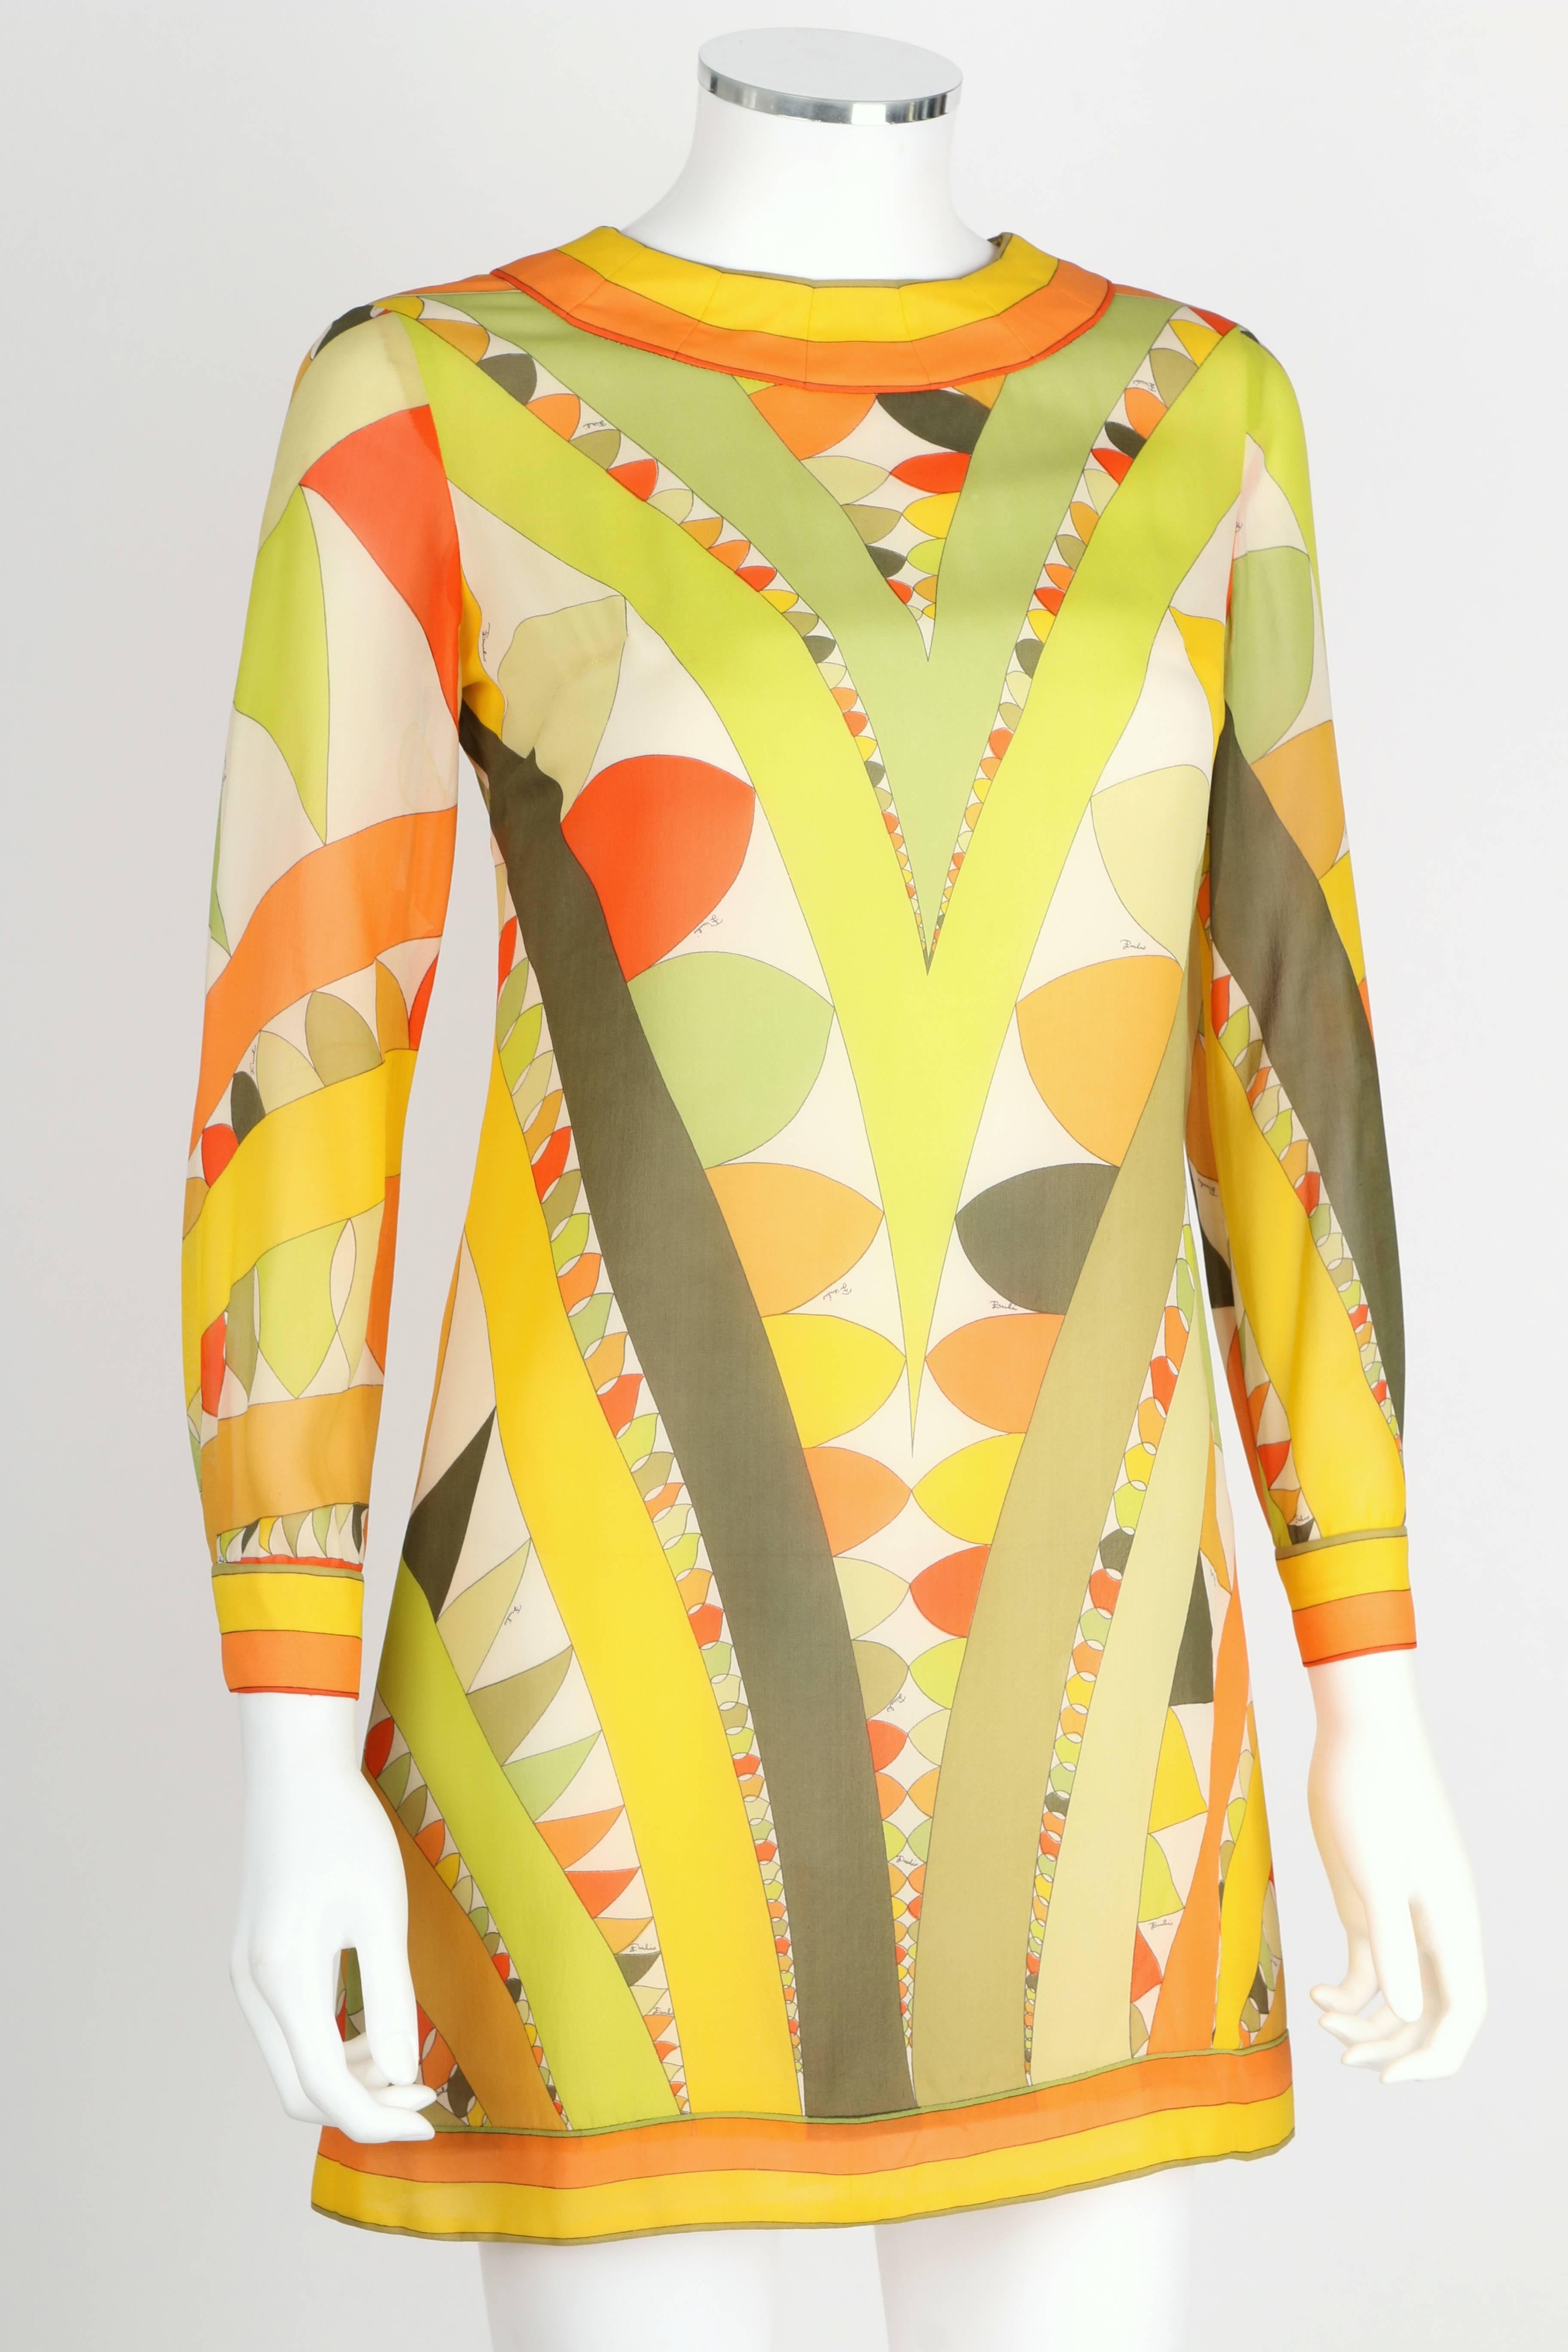 Vintage c.1960's Emilio Pucci signature print silk chiffon/georgette shift dress in shades of green, orange, yellow and white. Jewel neckline. Long sleeves button at fitted cuffs. Back center zipper. Lined. Marked Fabric Content: 